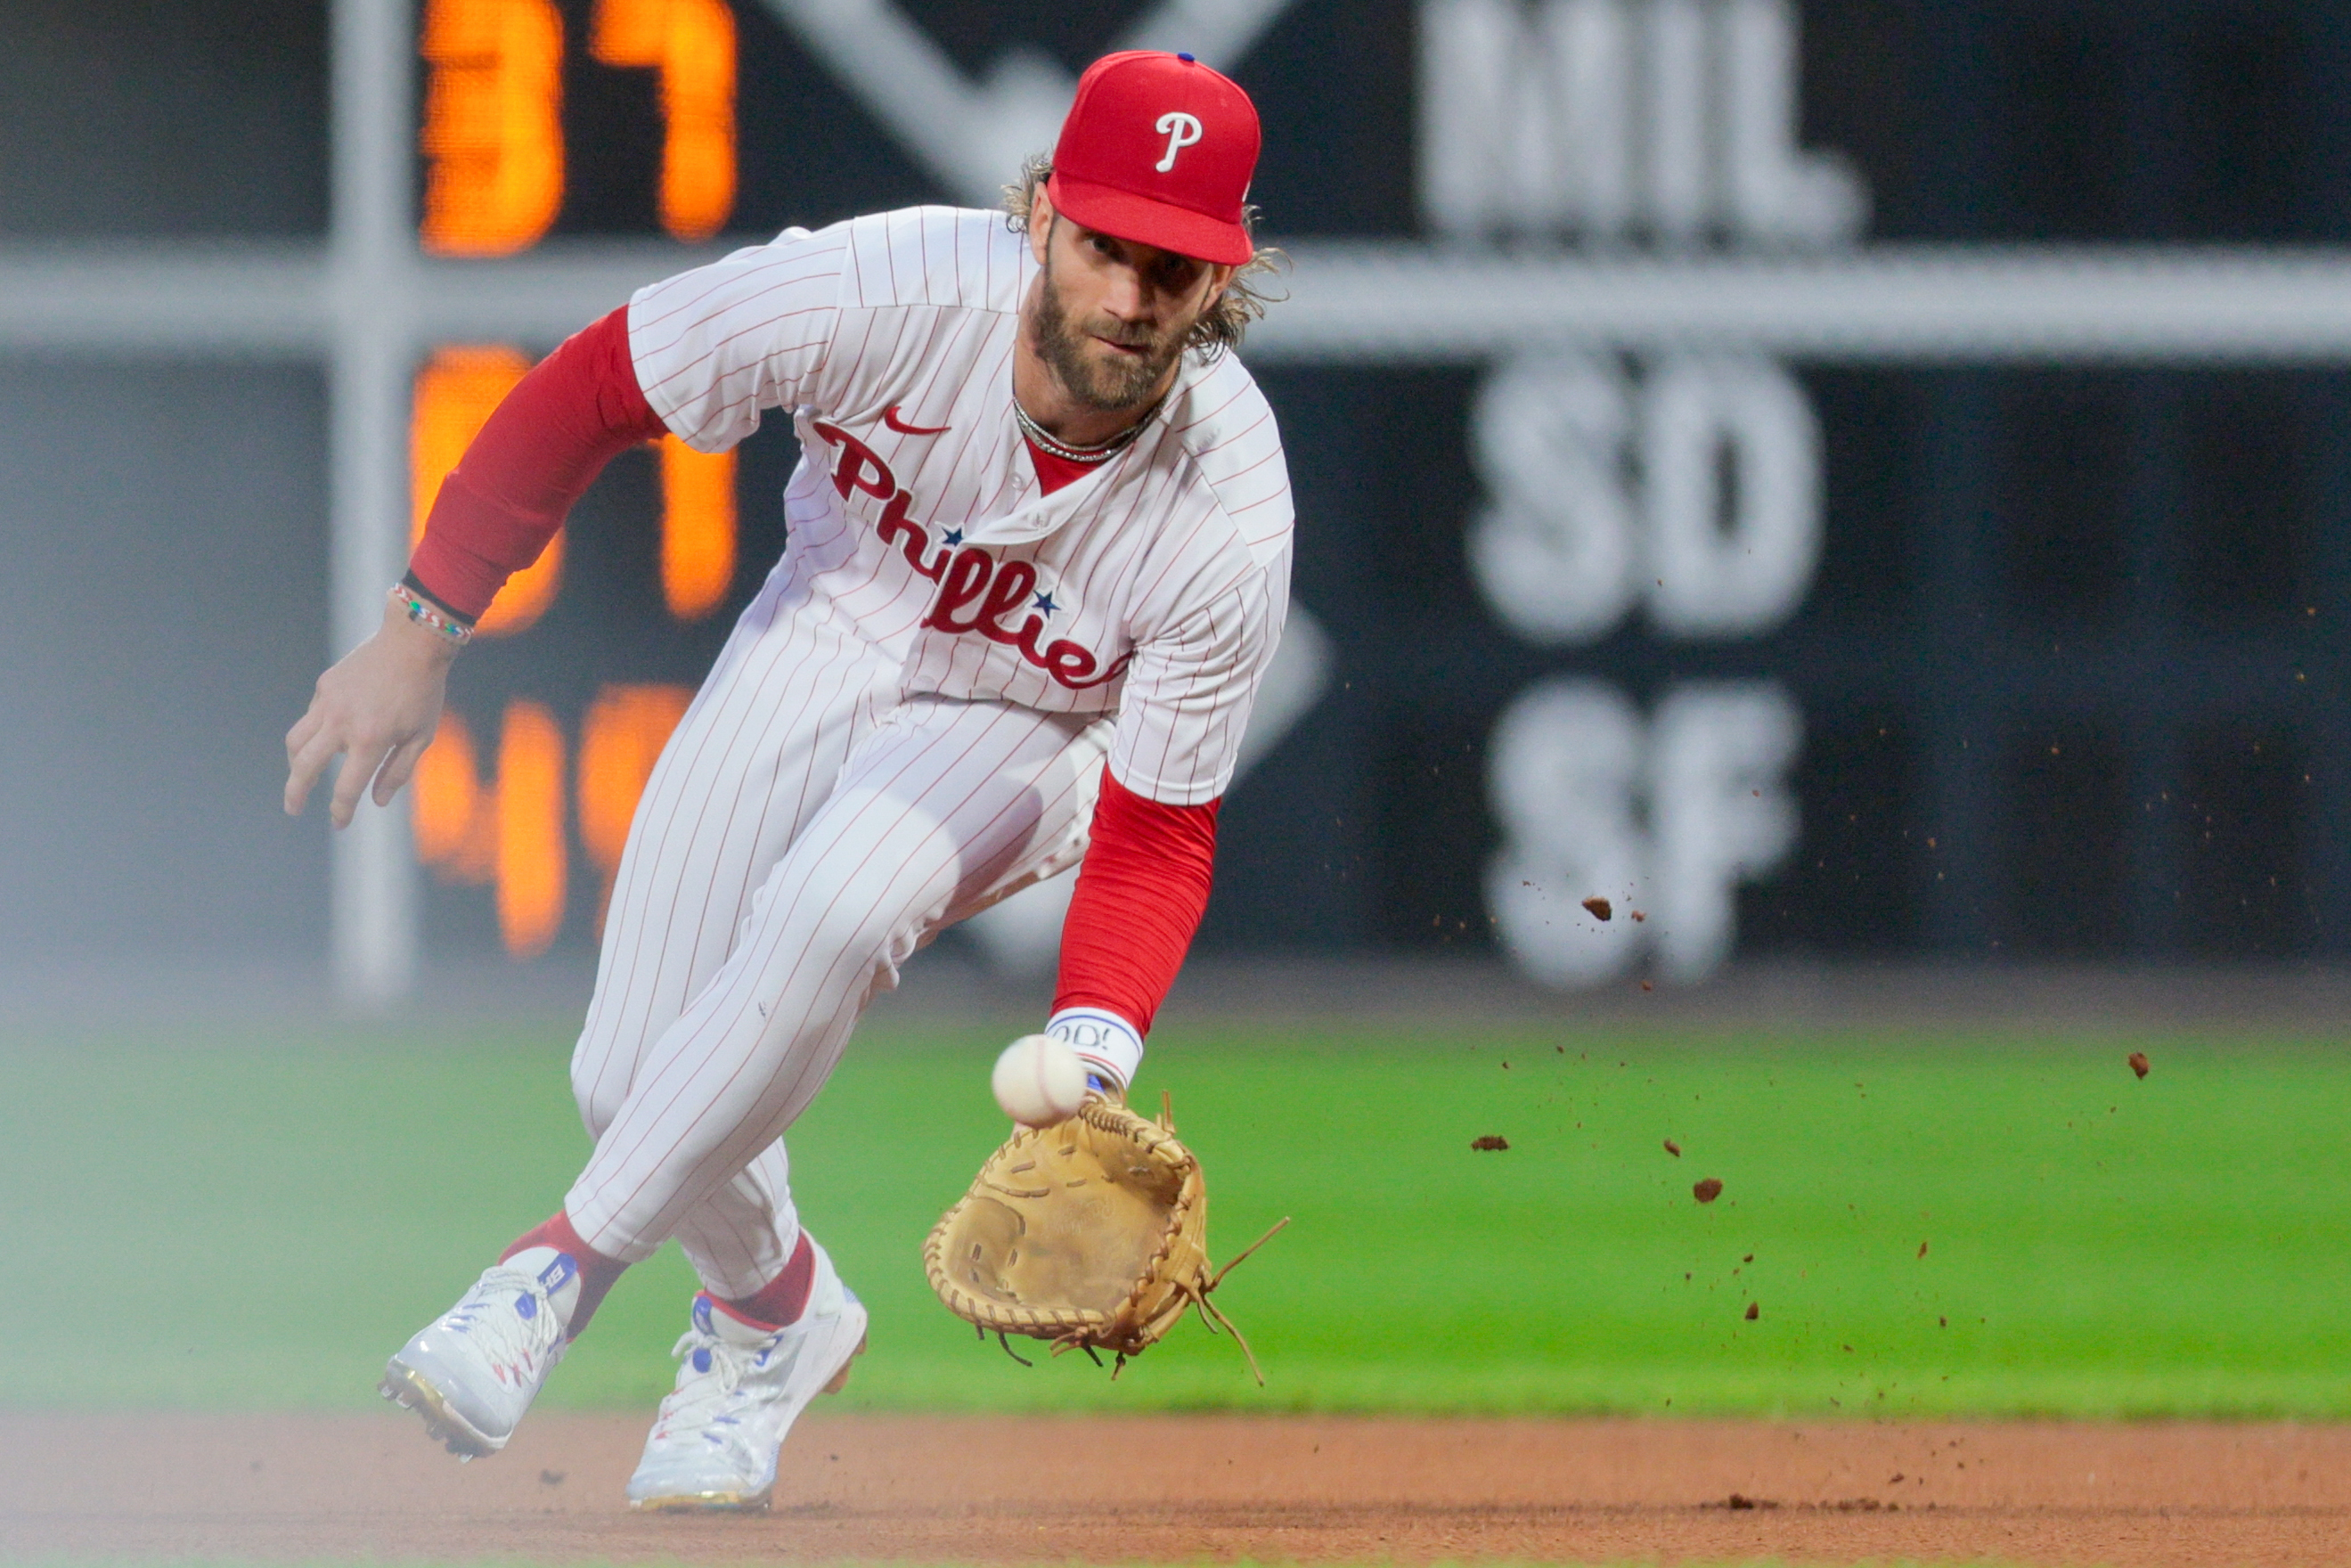 Sunday Night Baseball will heavily feature the Phillies in 2023